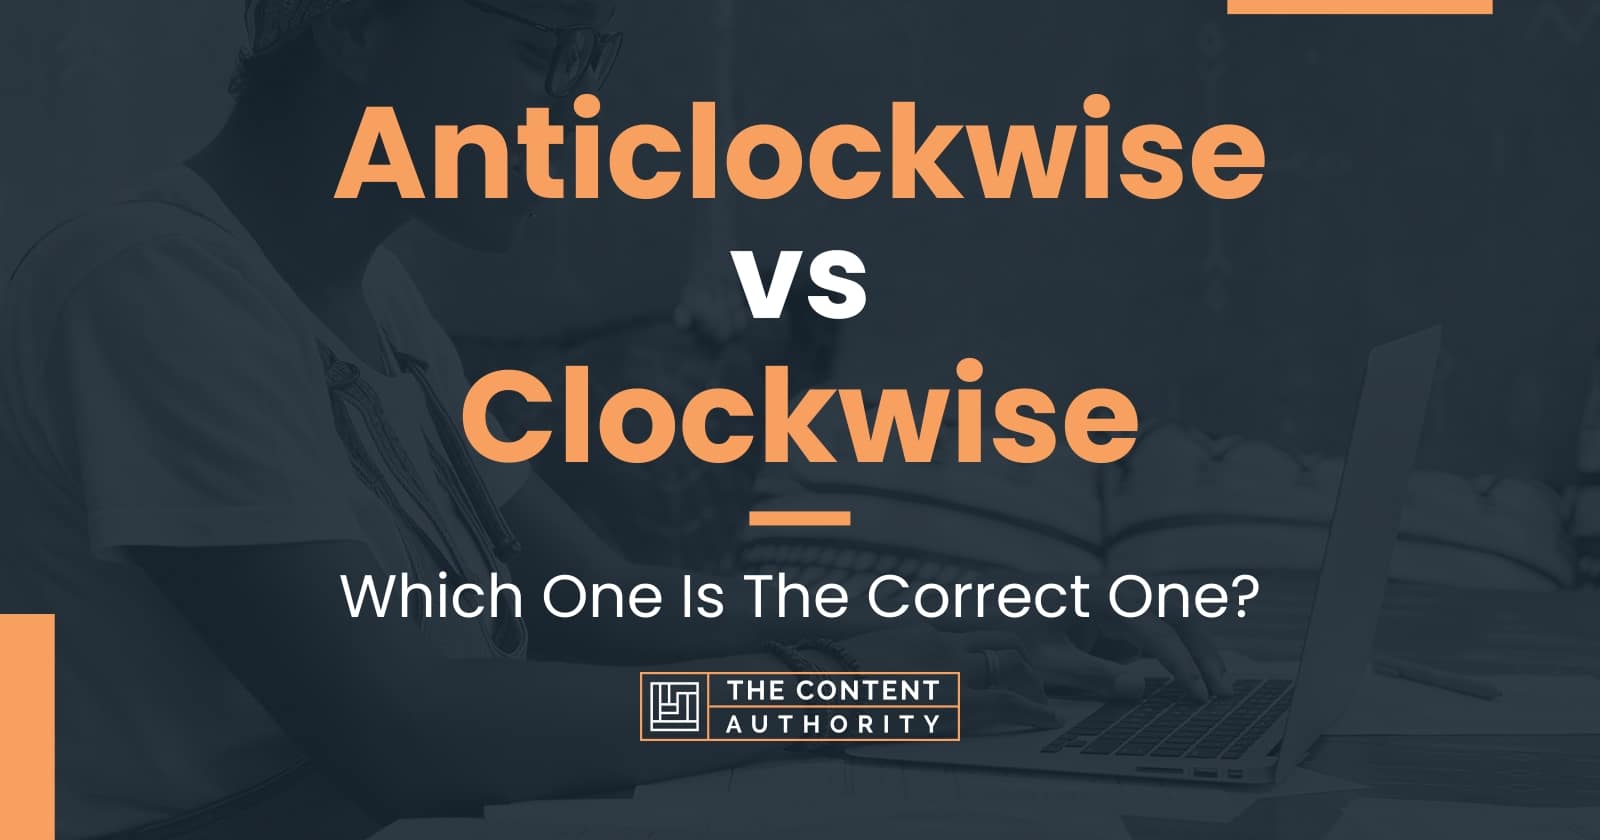 Anticlockwise vs Clockwise Which One Is The Correct One?